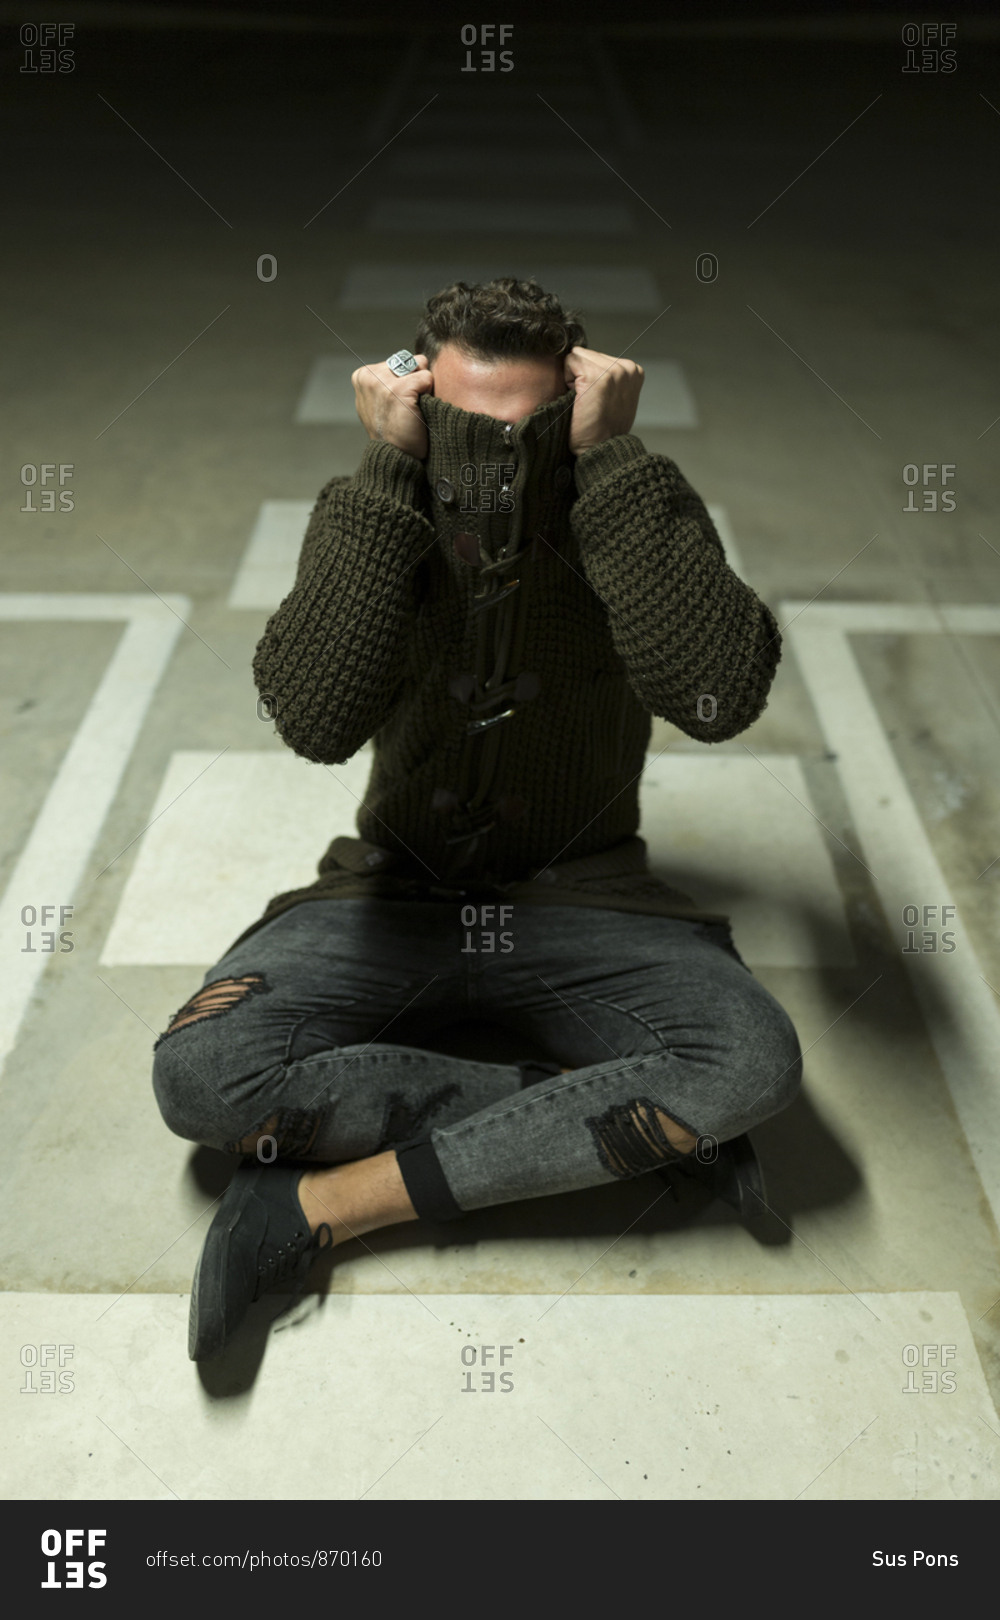 Portrait of a man sitting in a parking garage at night covering his face with sweater